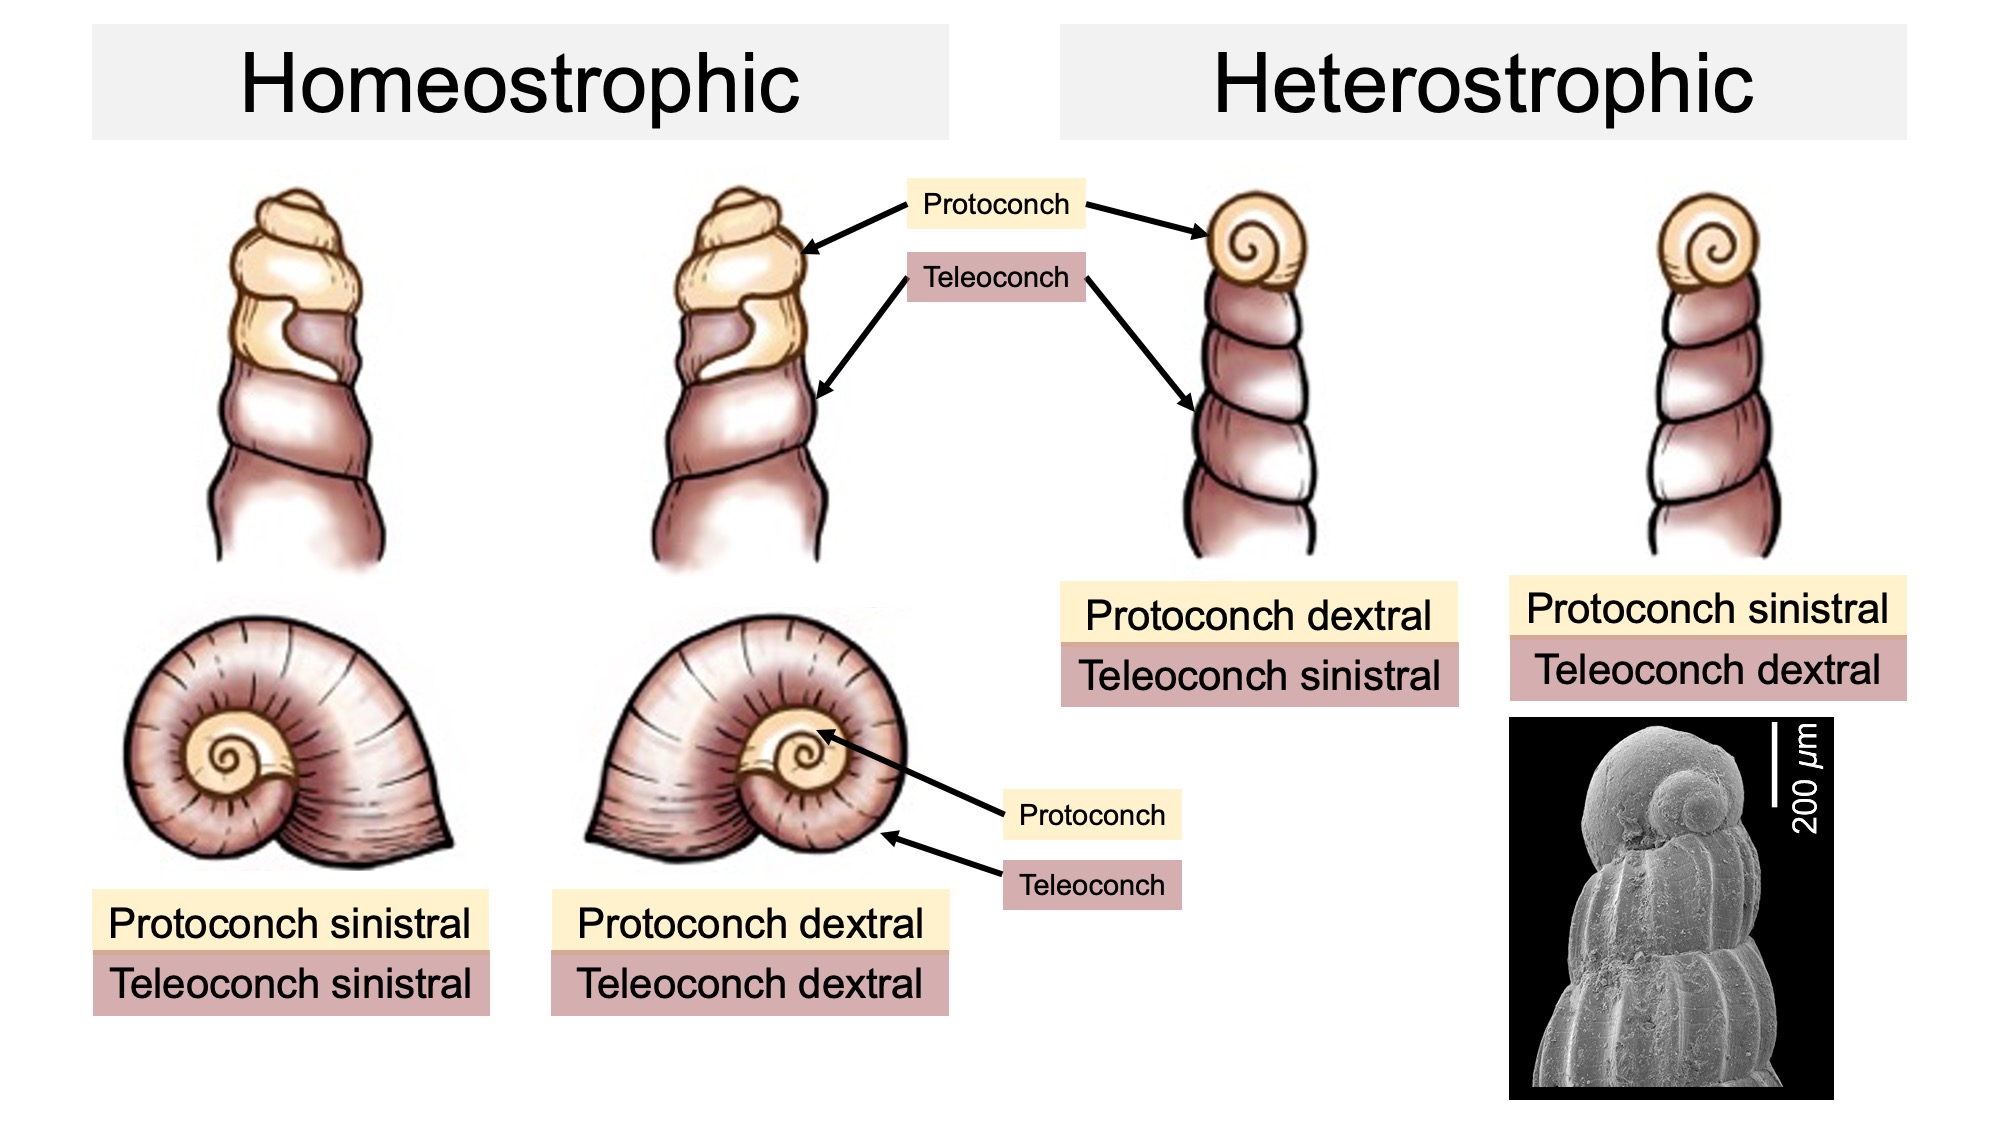 Image showing the differences between homeostrophic and heterostrophic gastropod protoconchs.